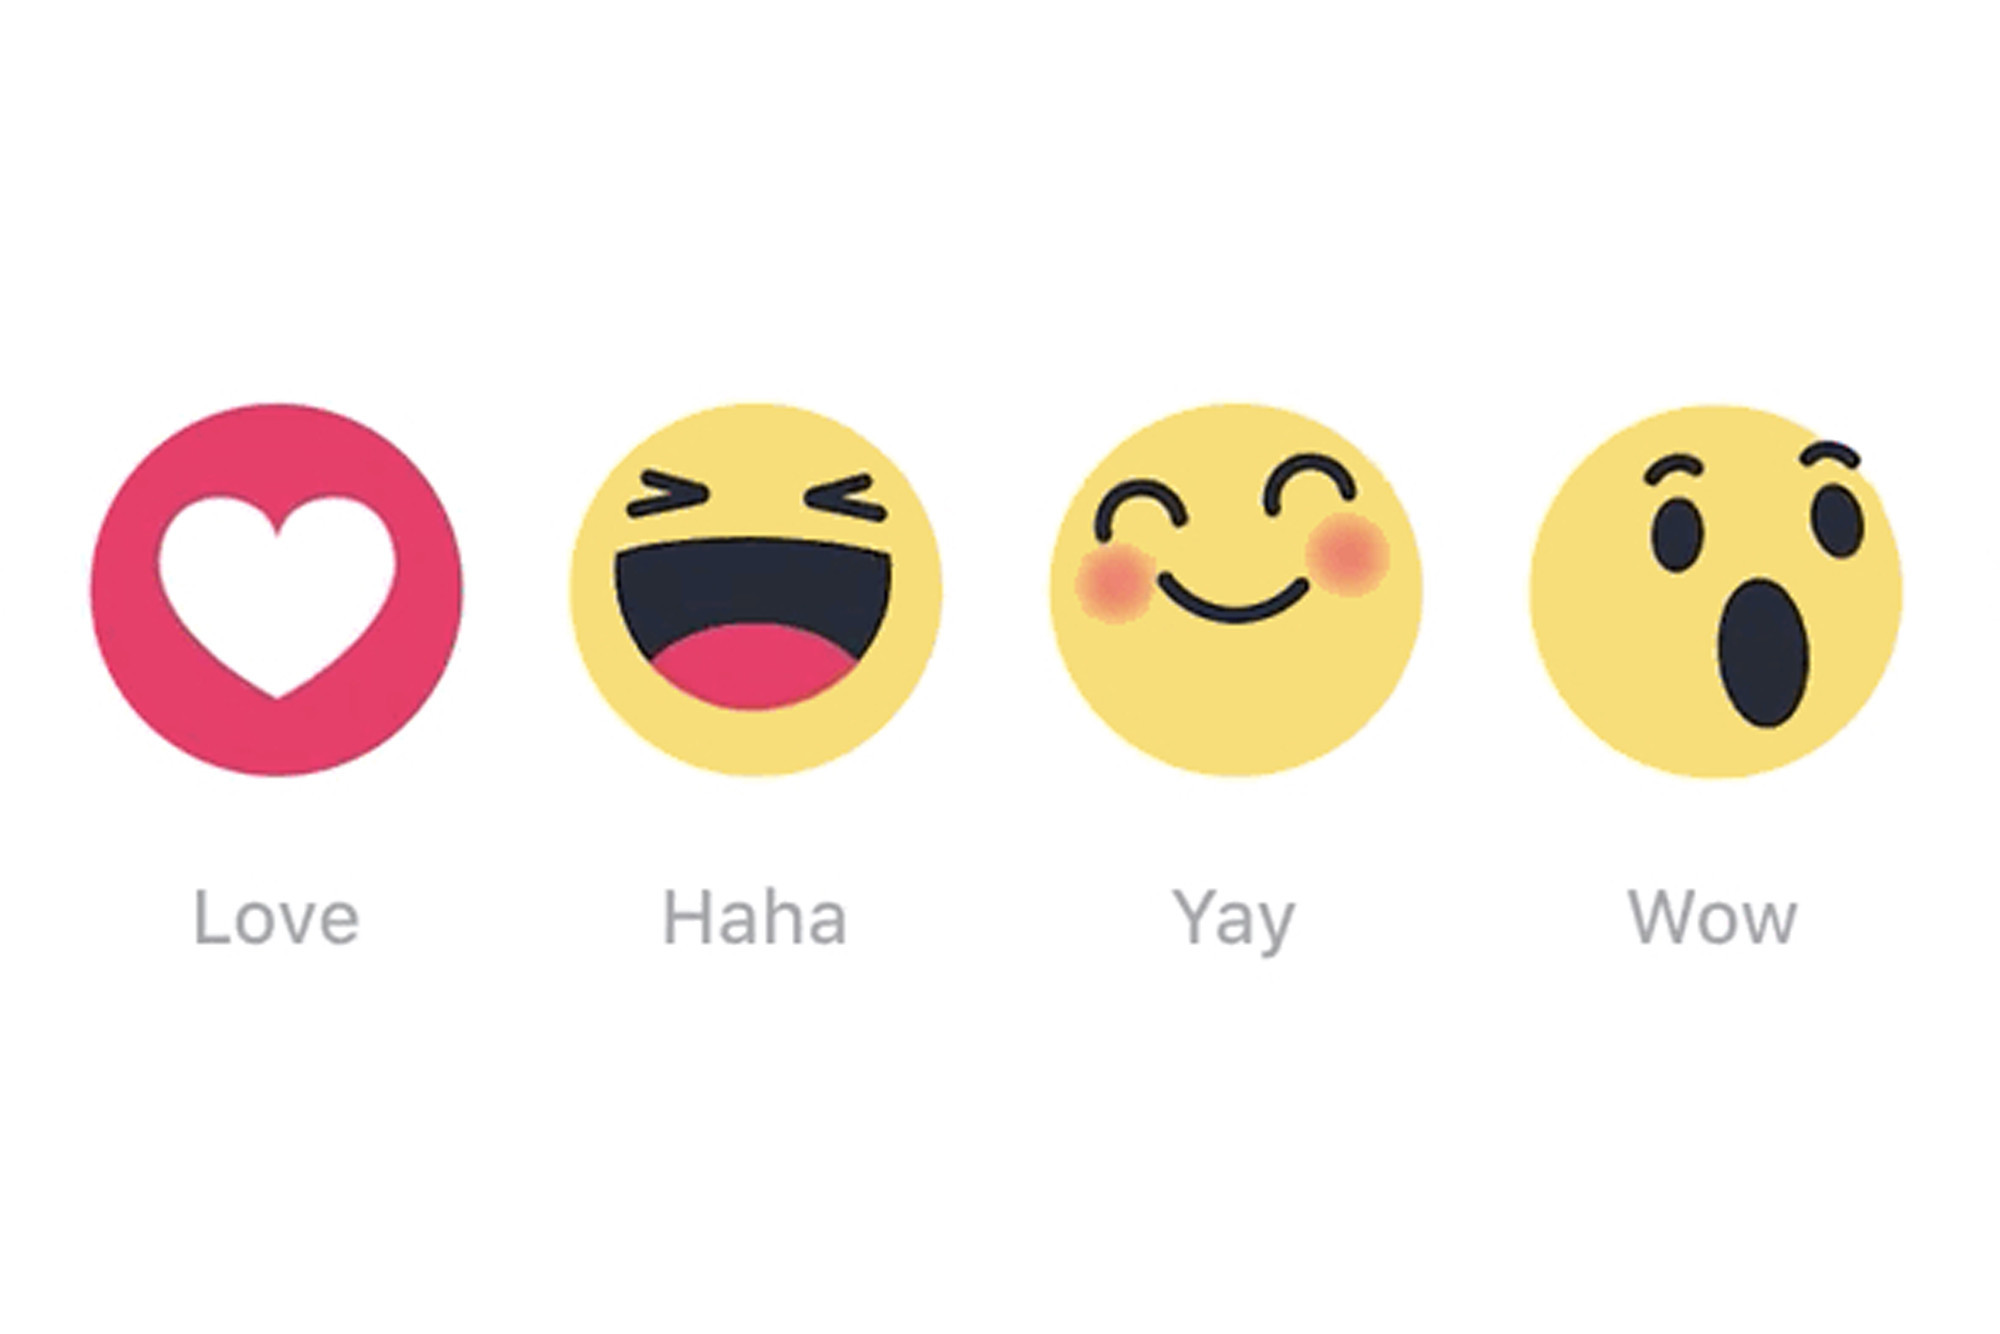 2000x1334 Facebook just did another face-plant with its awful emojis